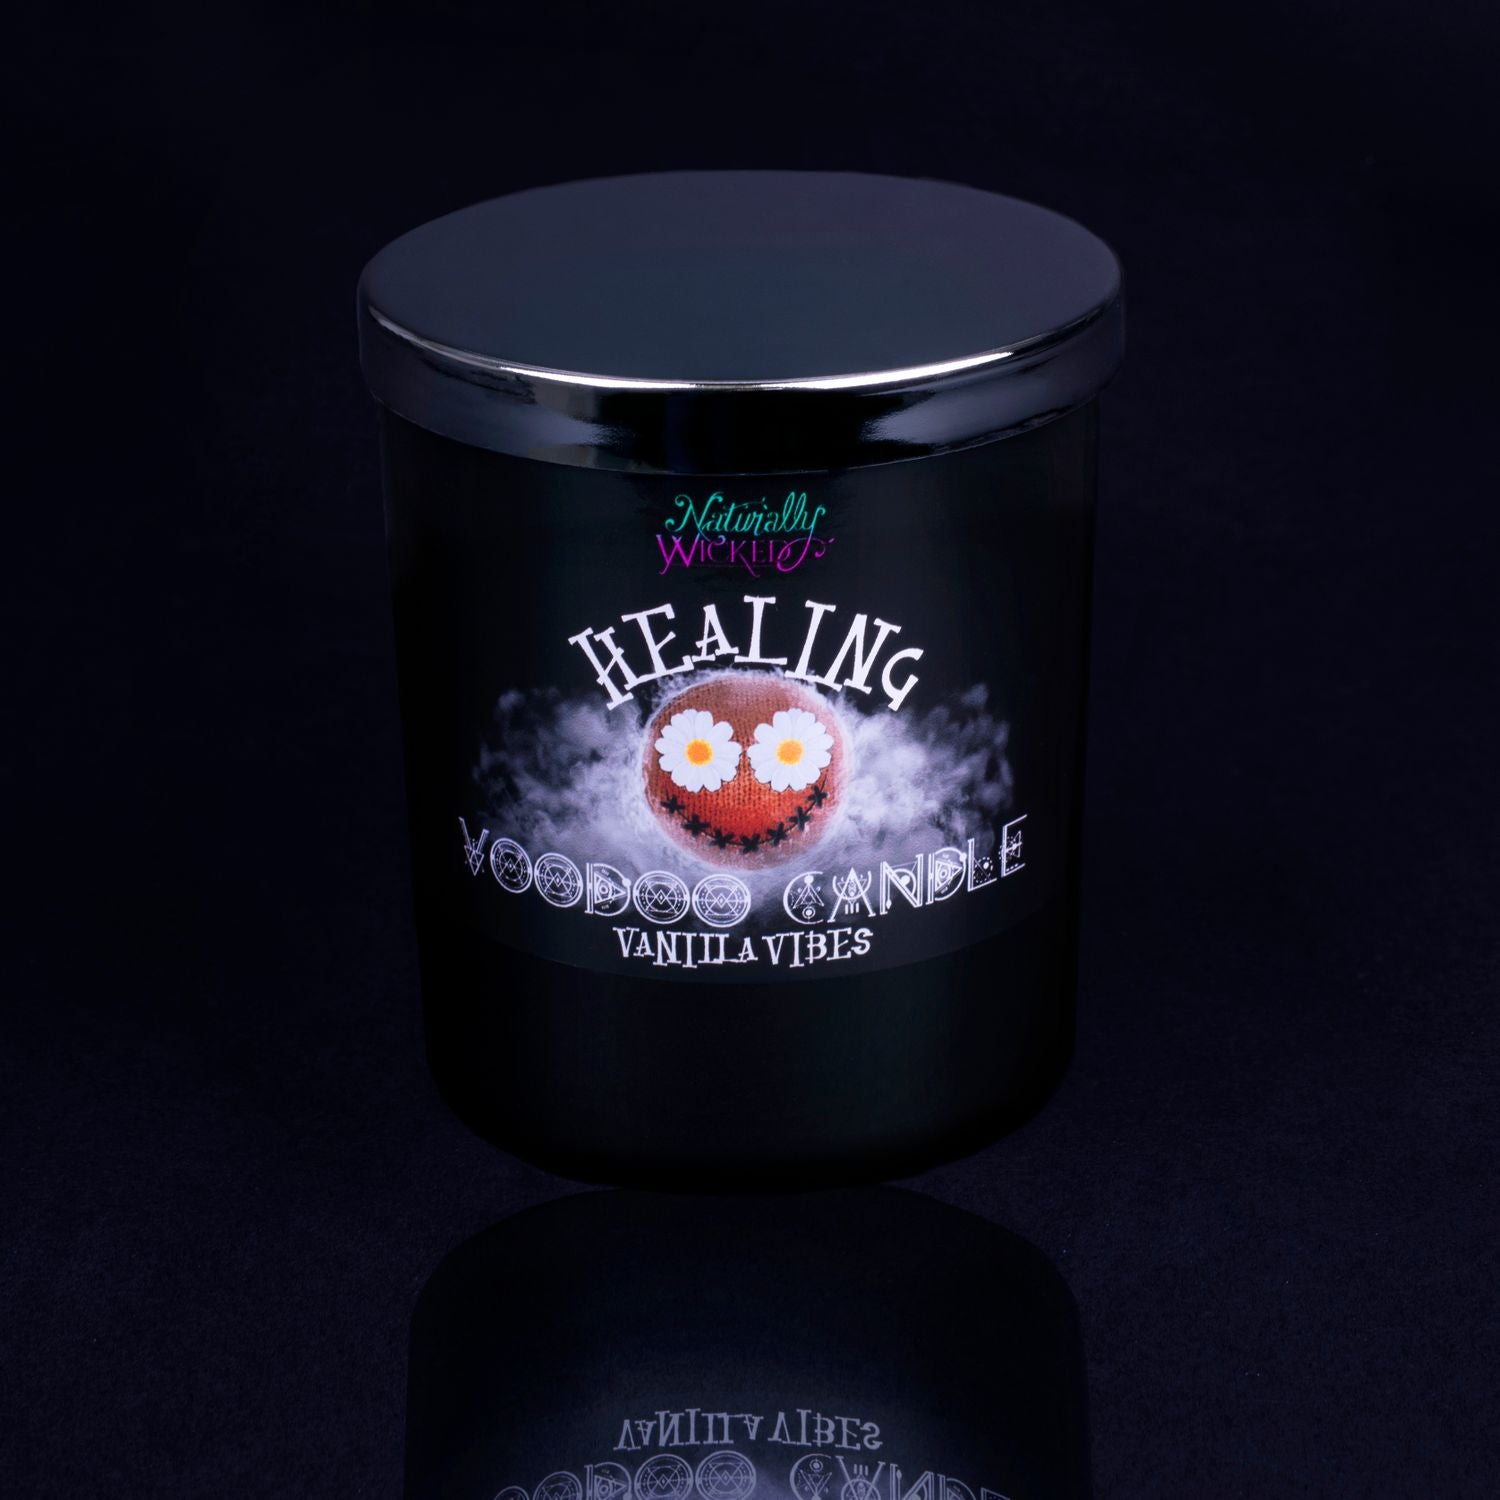 Naturally Wicked Voodoo Healing Spell Candle With Mirror Finished Exquisite Lid In Place. Featuring A Black Gloss Label, A Voodoo Doll Design And Vanilla Vibes Scent.